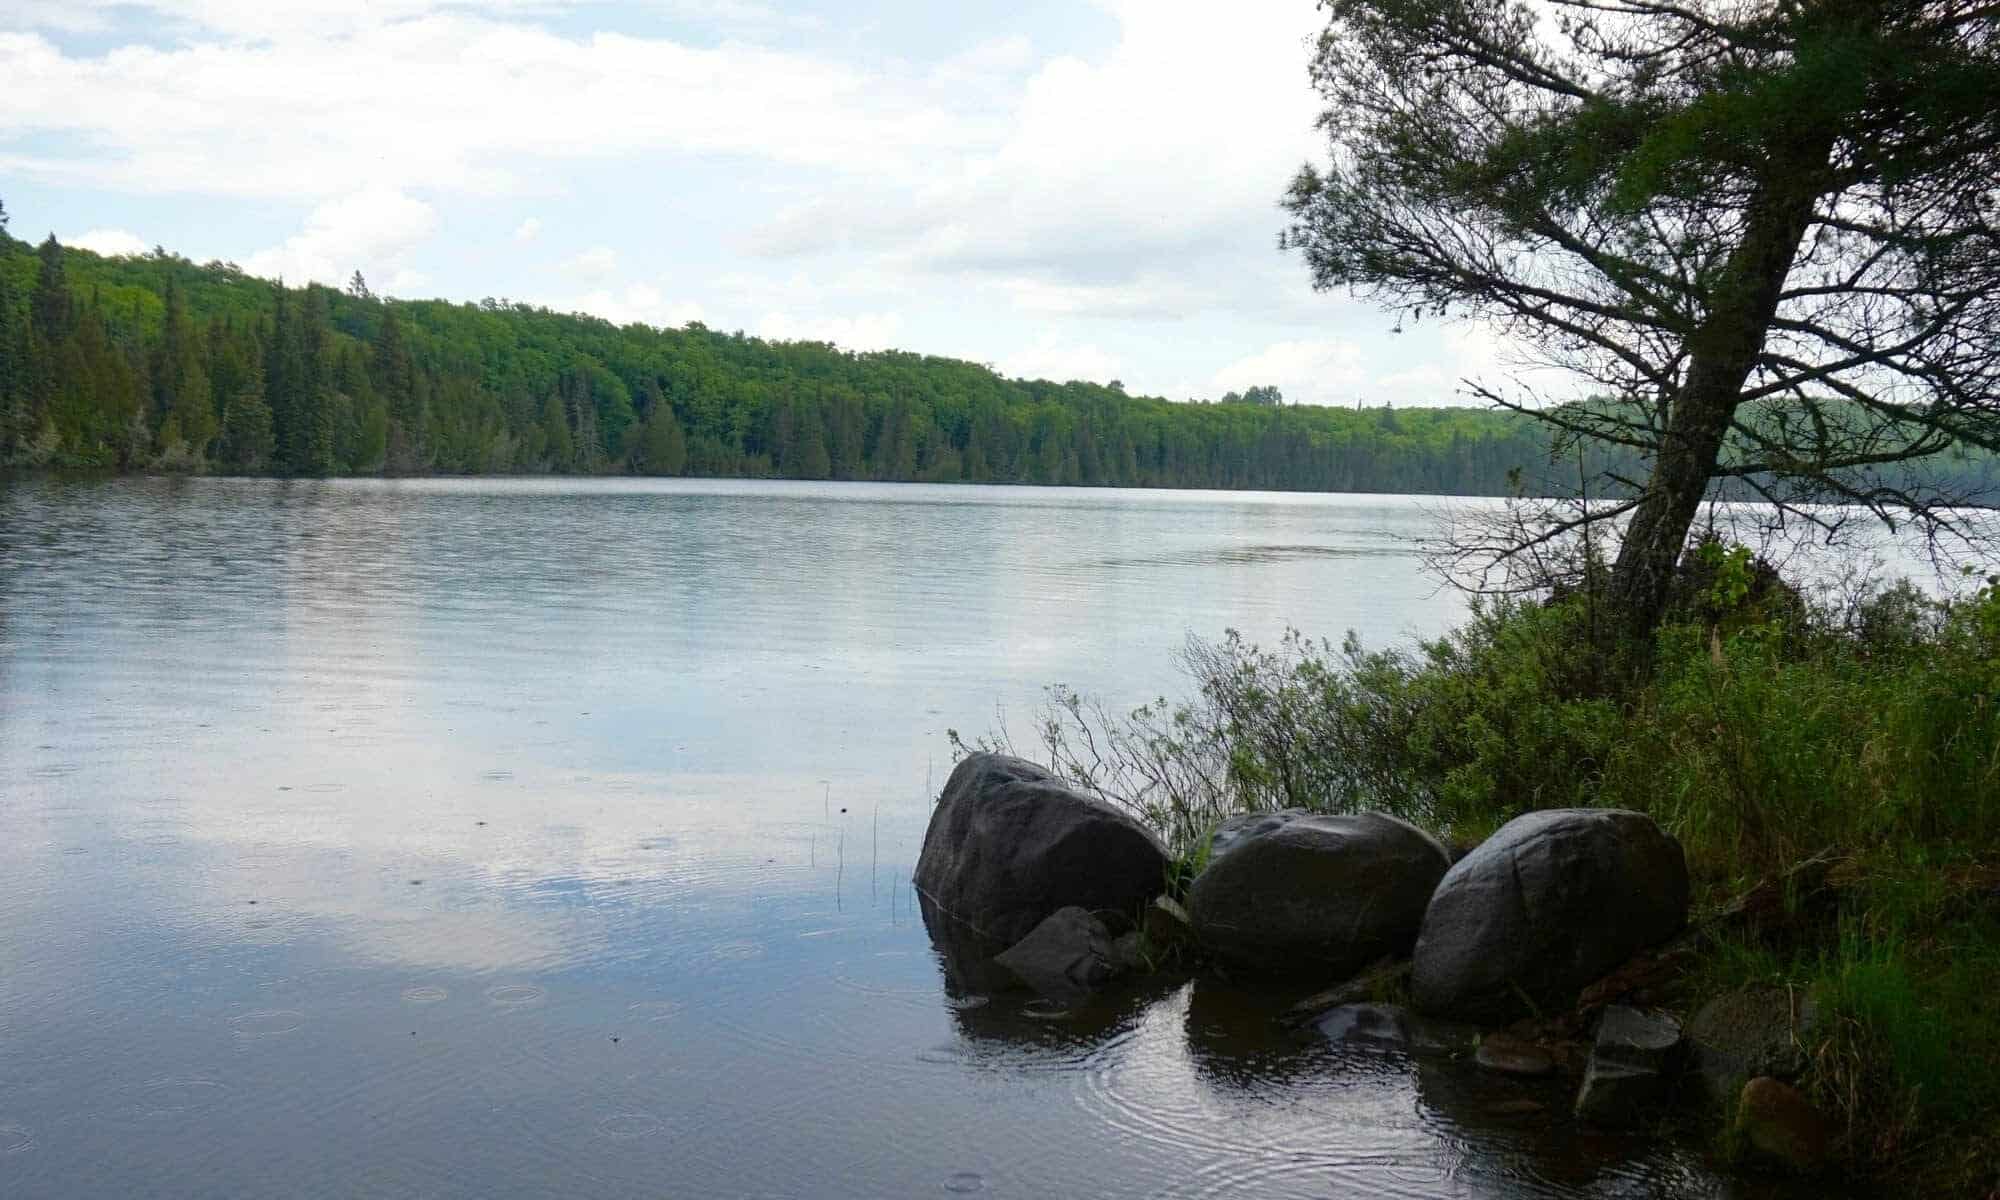 Study finds pharmaceuticals, other chemicals in remote Minnesota lakes